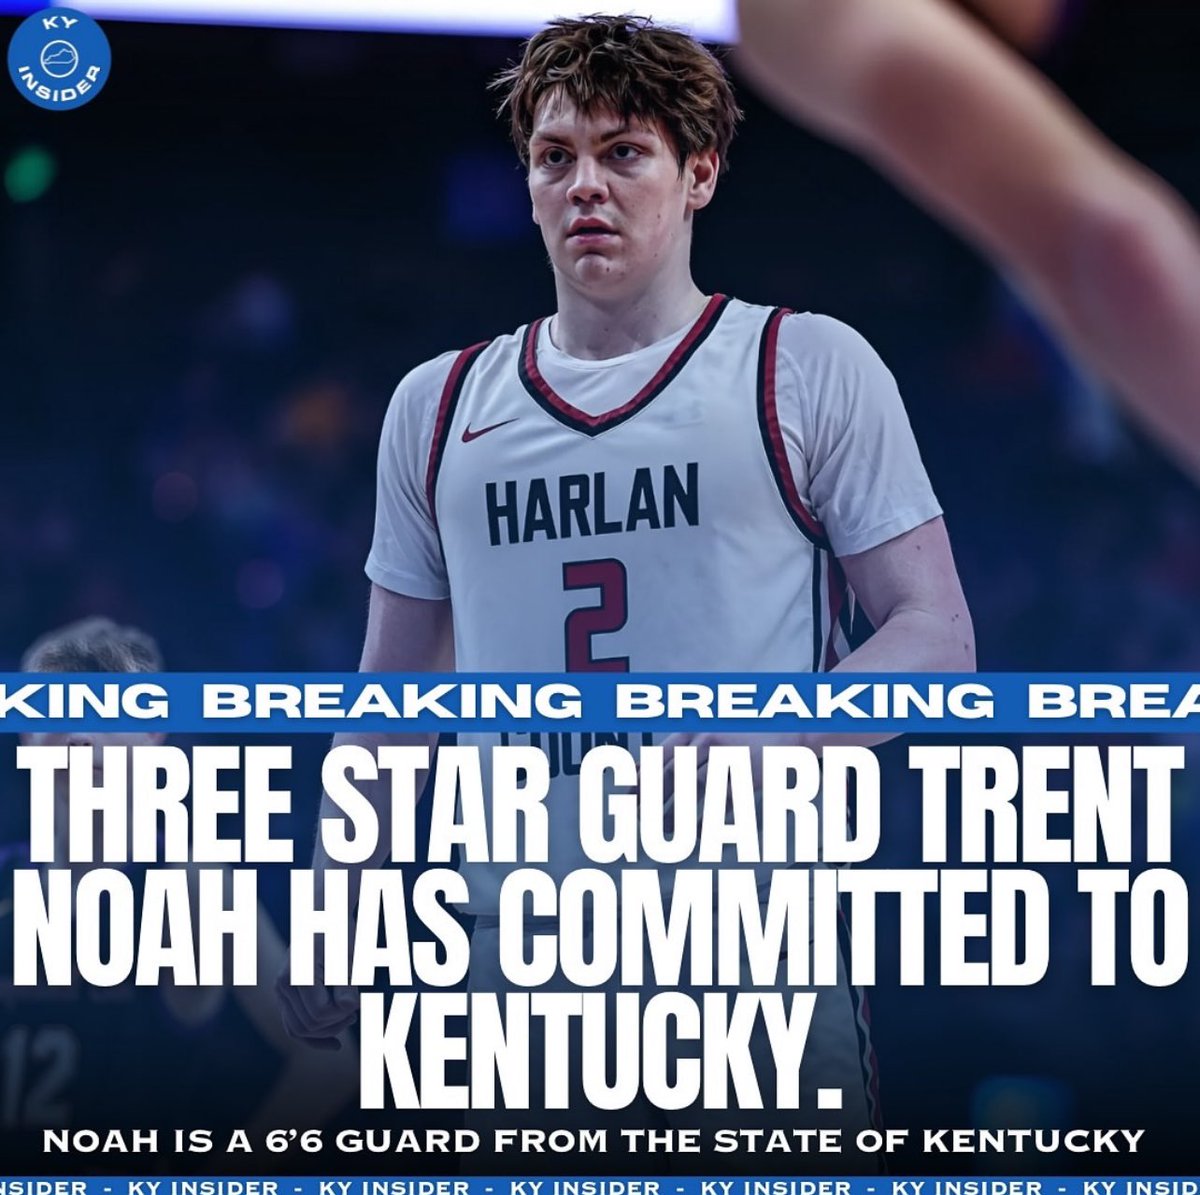 Trent Noah is a Kentucky Wildcat! Mark Pope talked about getting Kentucky’s best talent when he was first hired: “These young men that grow up in Kentucky, they bring a spirit to the team that cannot be fabricated or replaced. And it helps us to win, and we will continue to